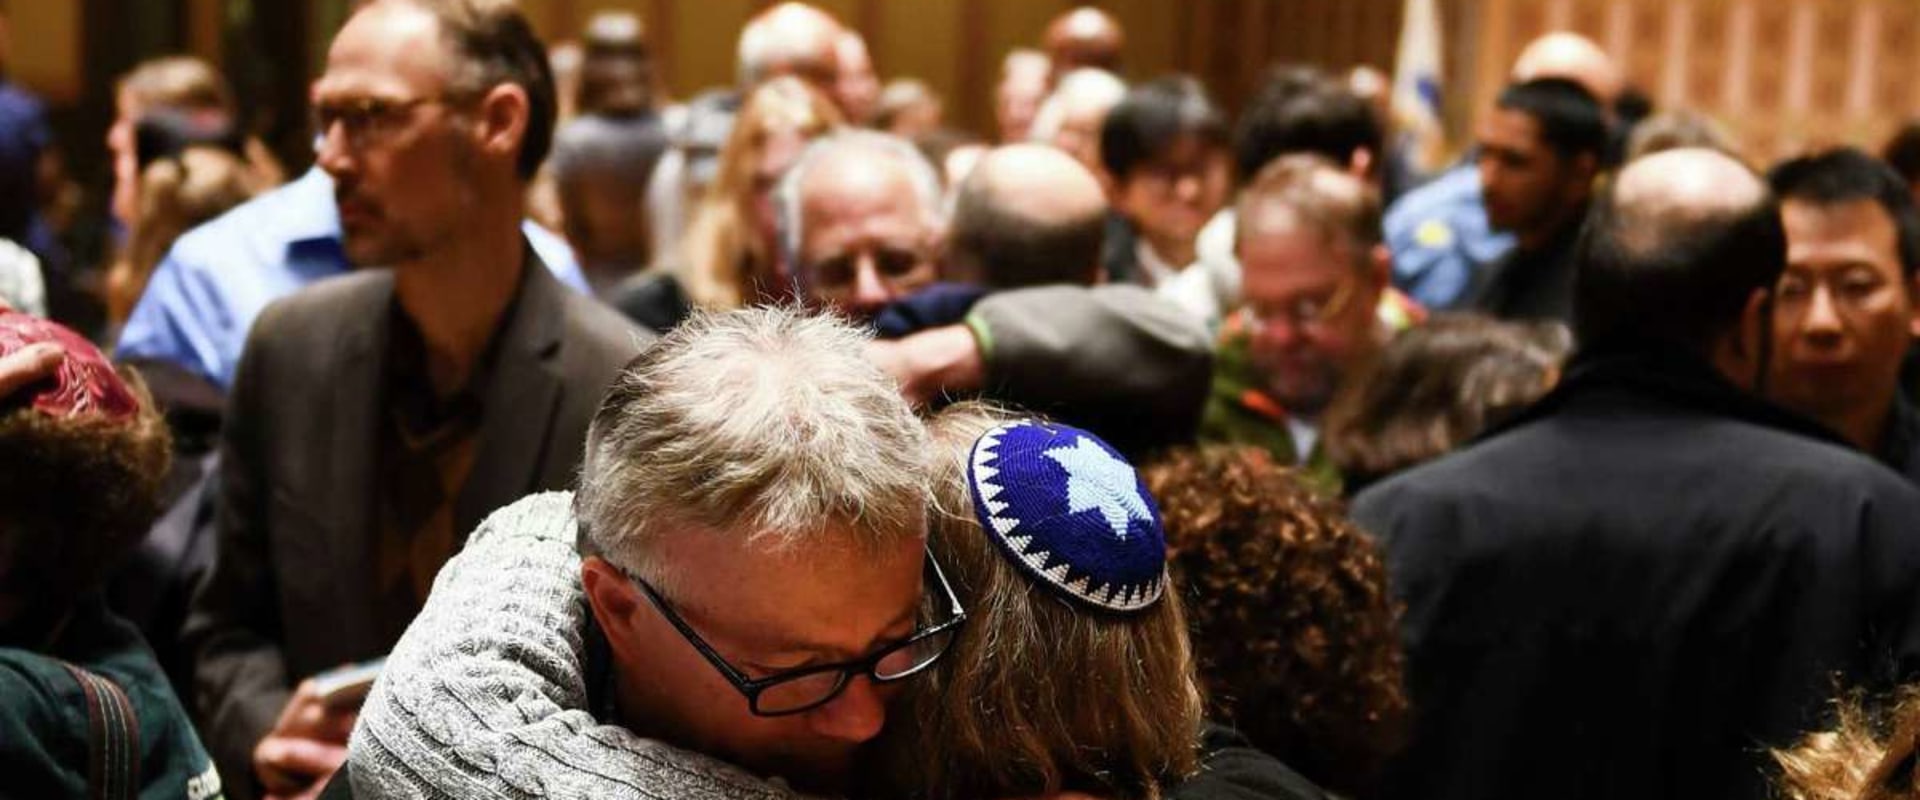 The Jewish Faith in Fort Bend County, TX: A Look at Religious Beliefs